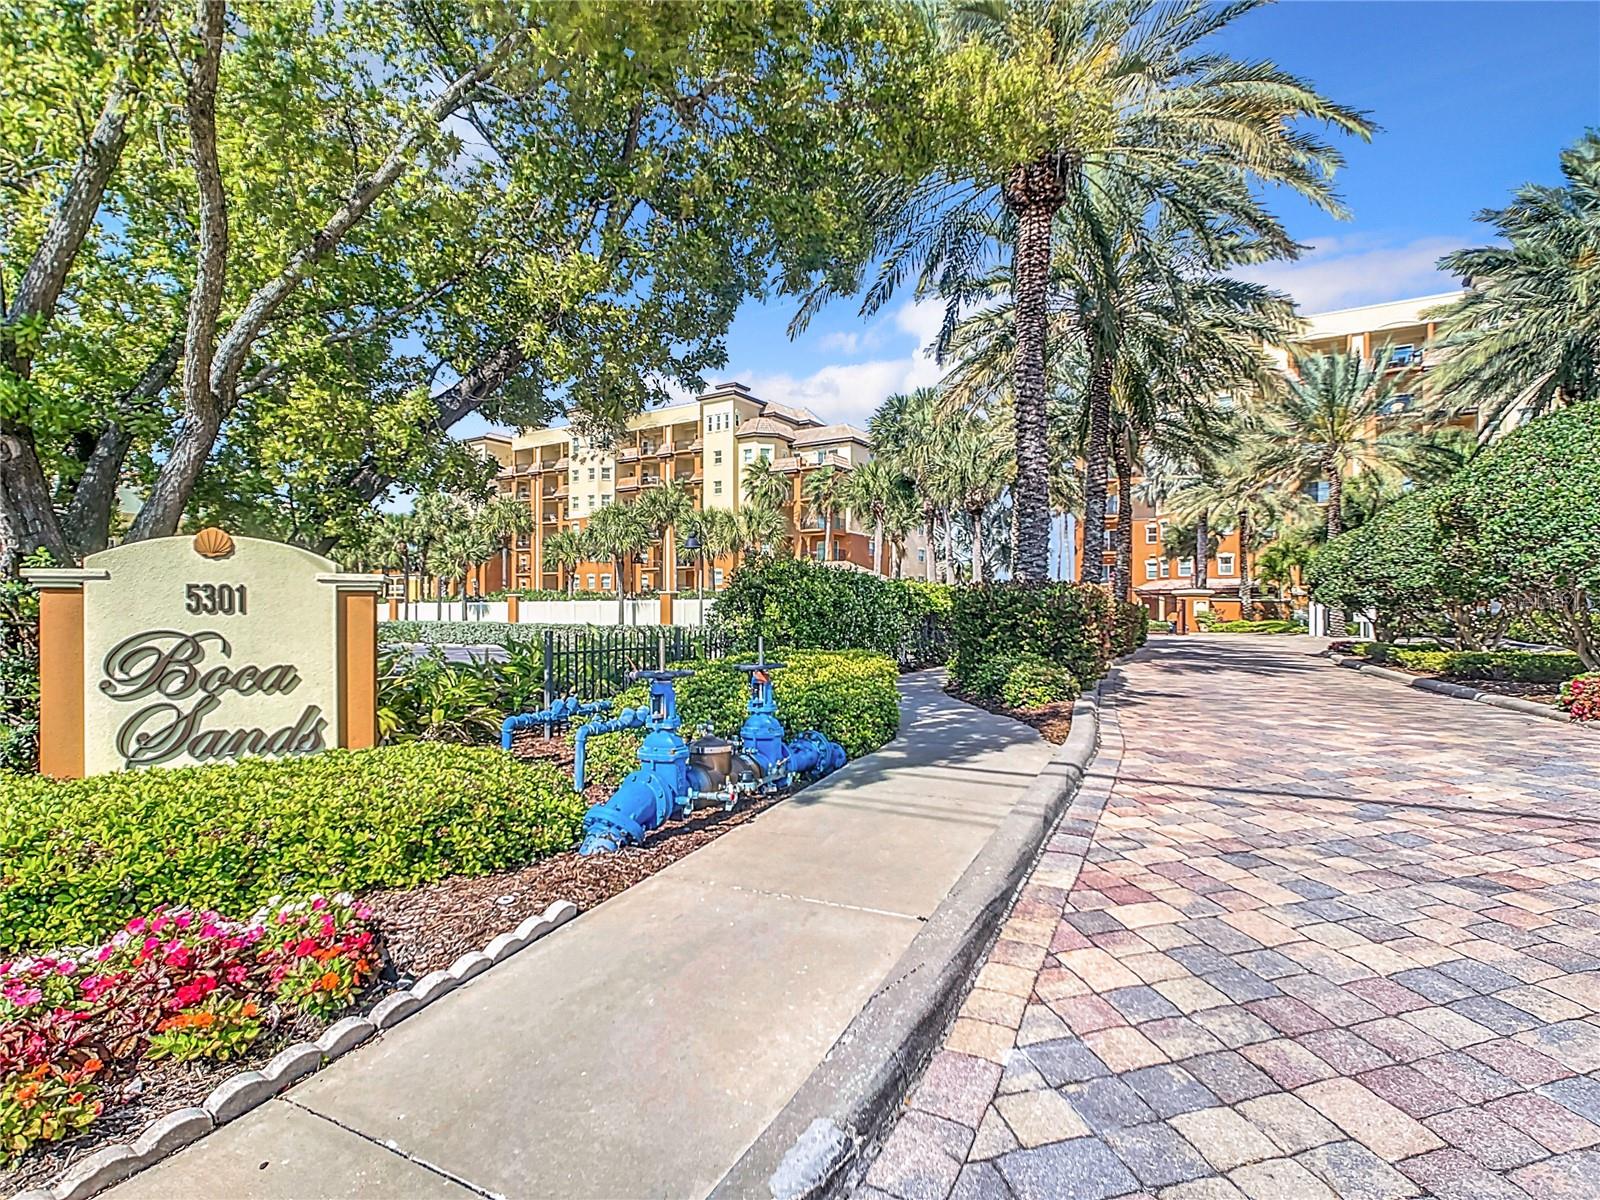 This is a gated community located directly on Boca Ciega Bay.